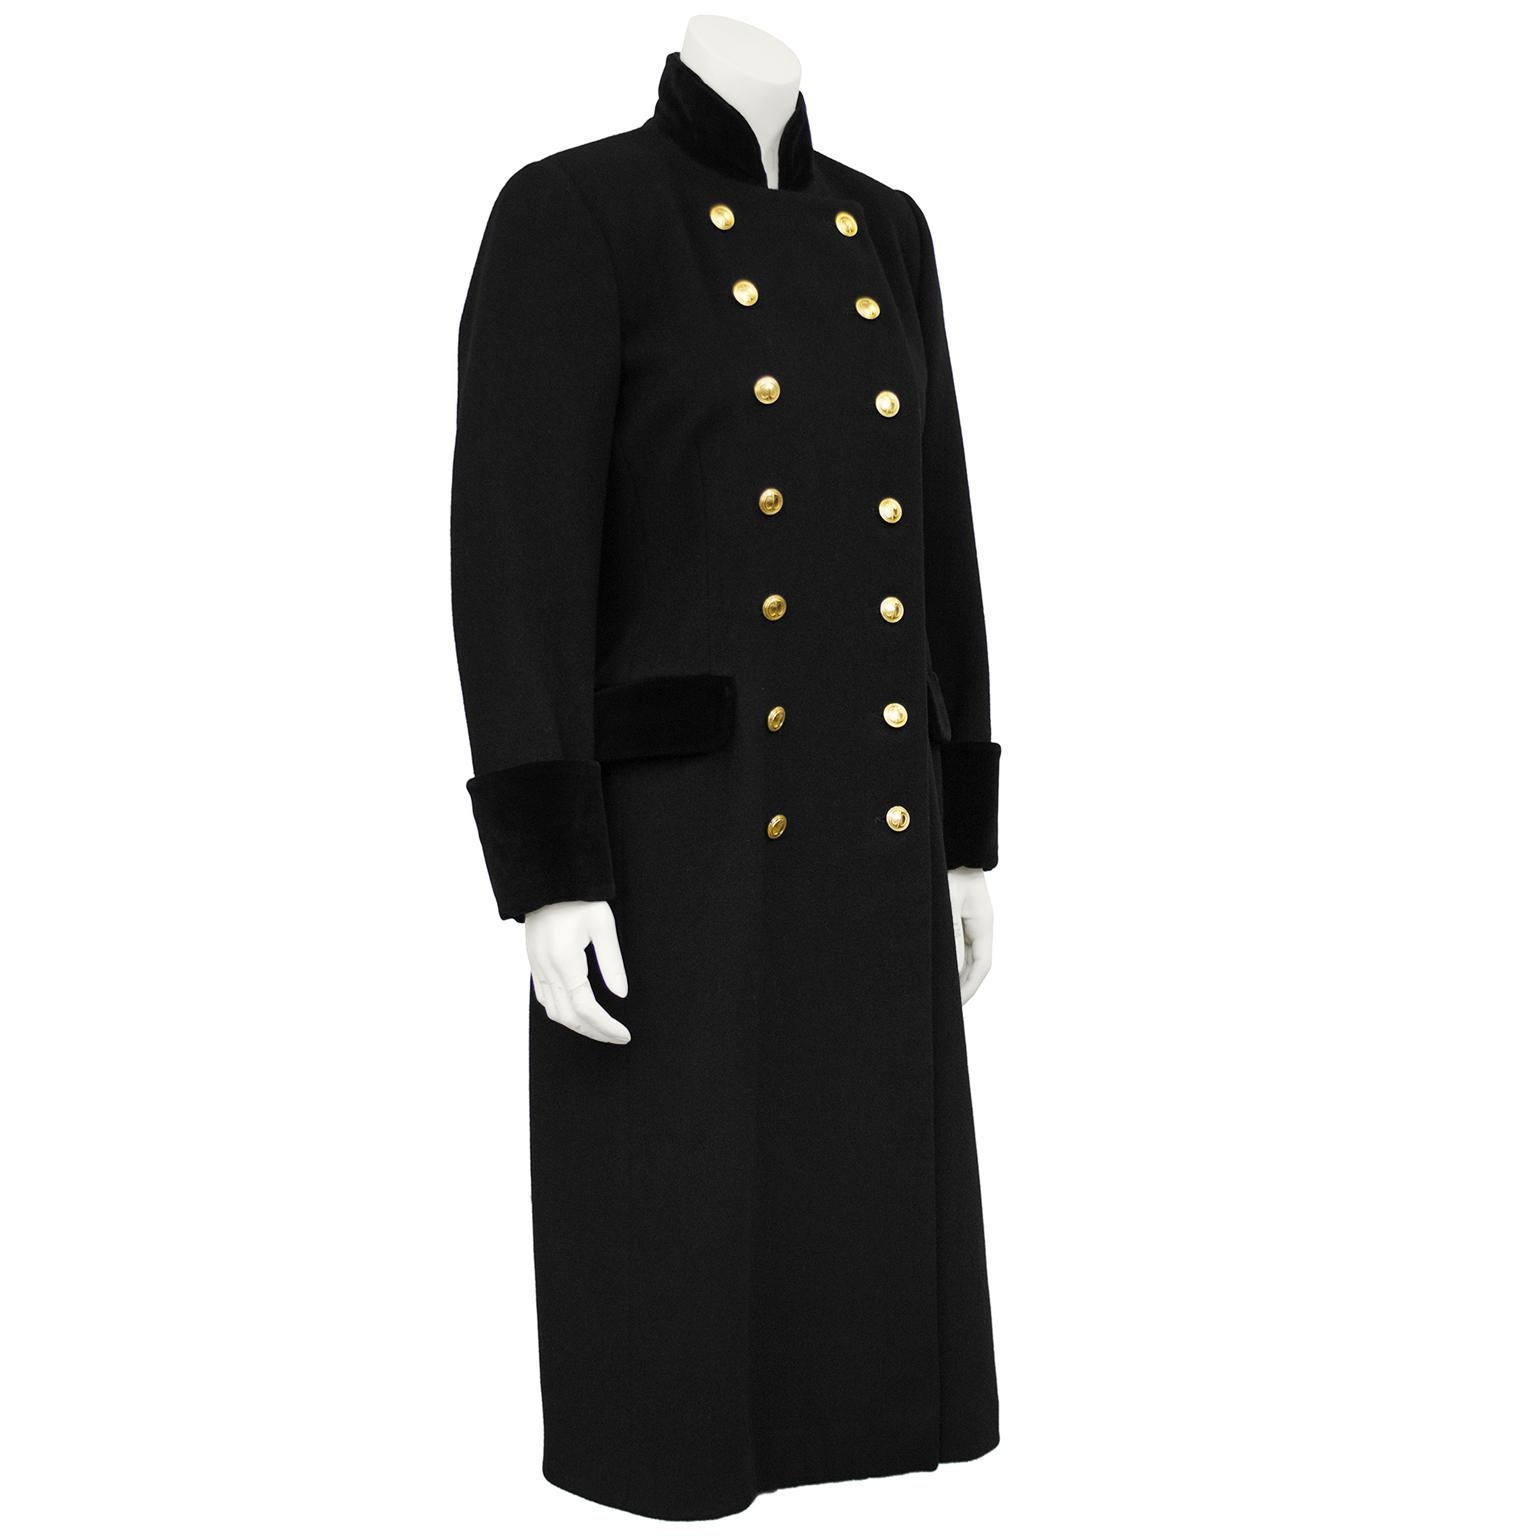 Christian Dior black military style coat from the 1980s. Black wool with black velvet cuffs, collar and pocket flaps. Double breasted with gold CD buttons. In excellent condition, fits like a US 4-6. 